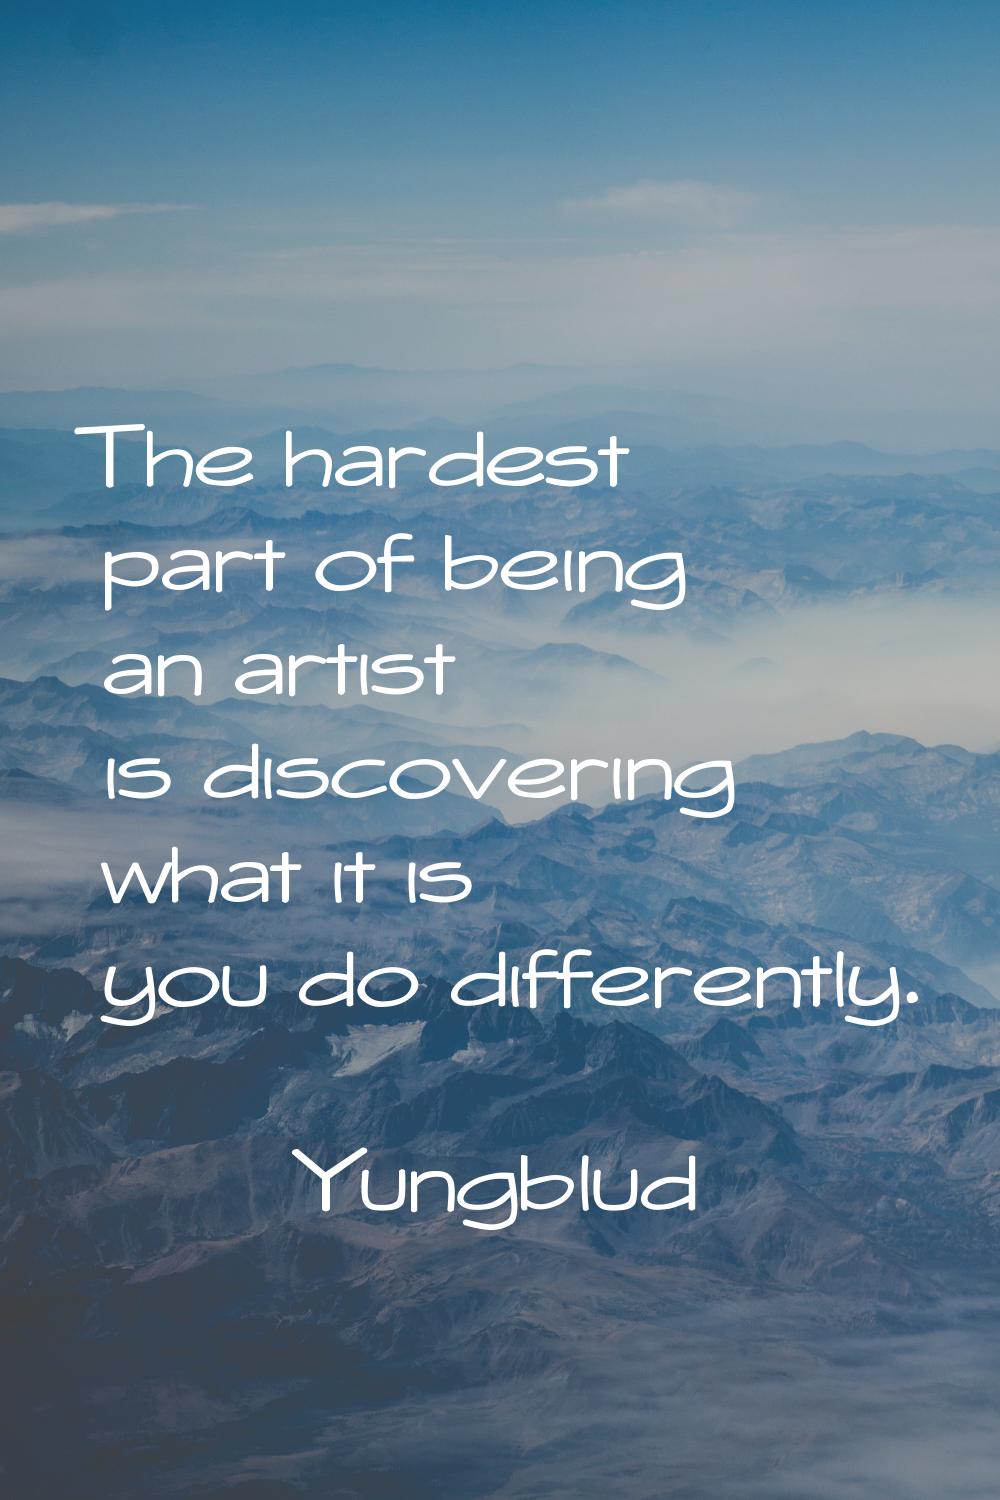 The hardest part of being an artist is discovering what it is you do differently.